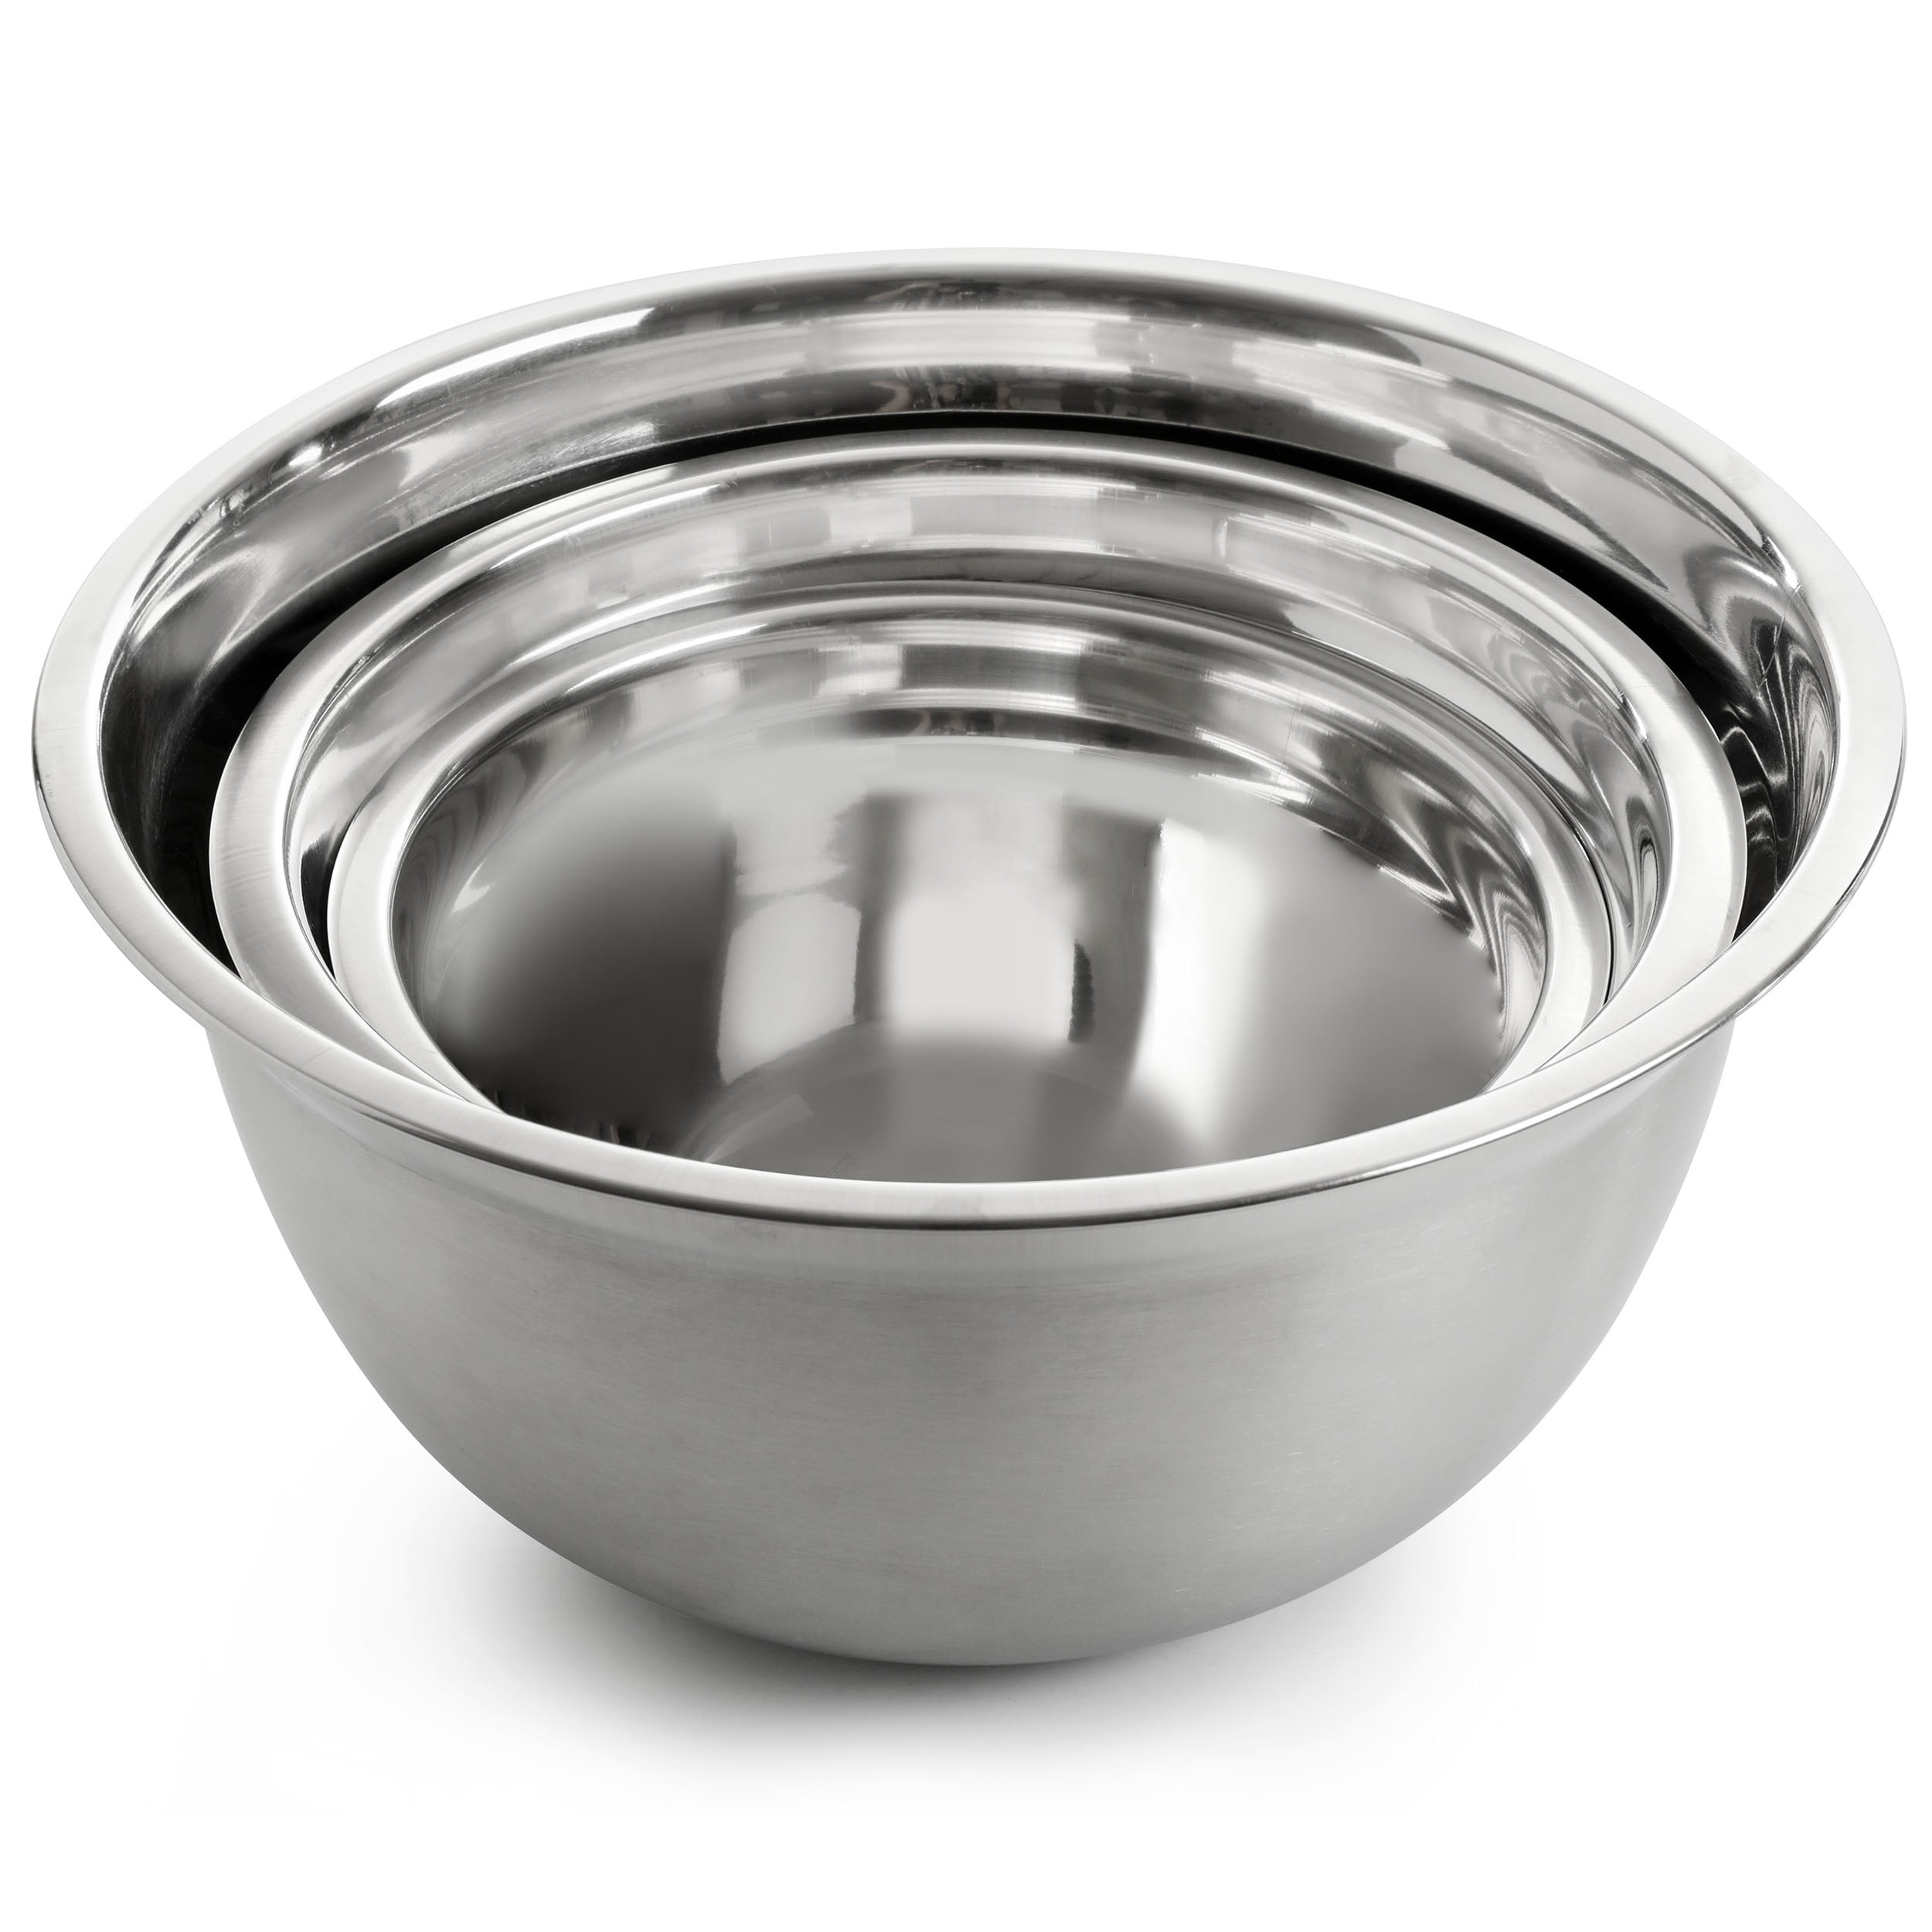 Rorence Stainless Steel Colorful Mixing Bowls with Lids – Set of 3